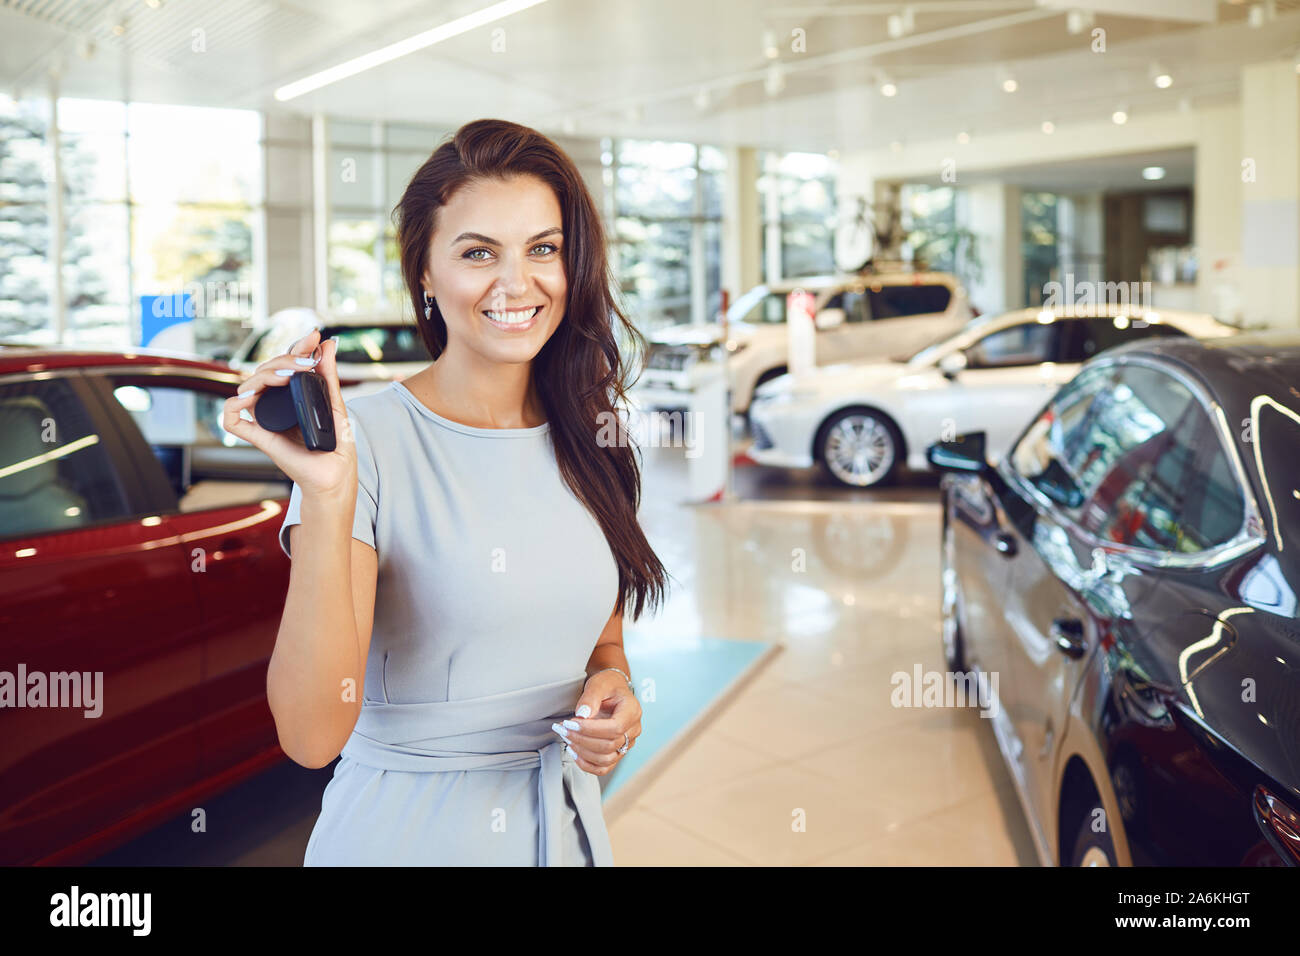 A male buyer is sitting in a new car. Stock Photo